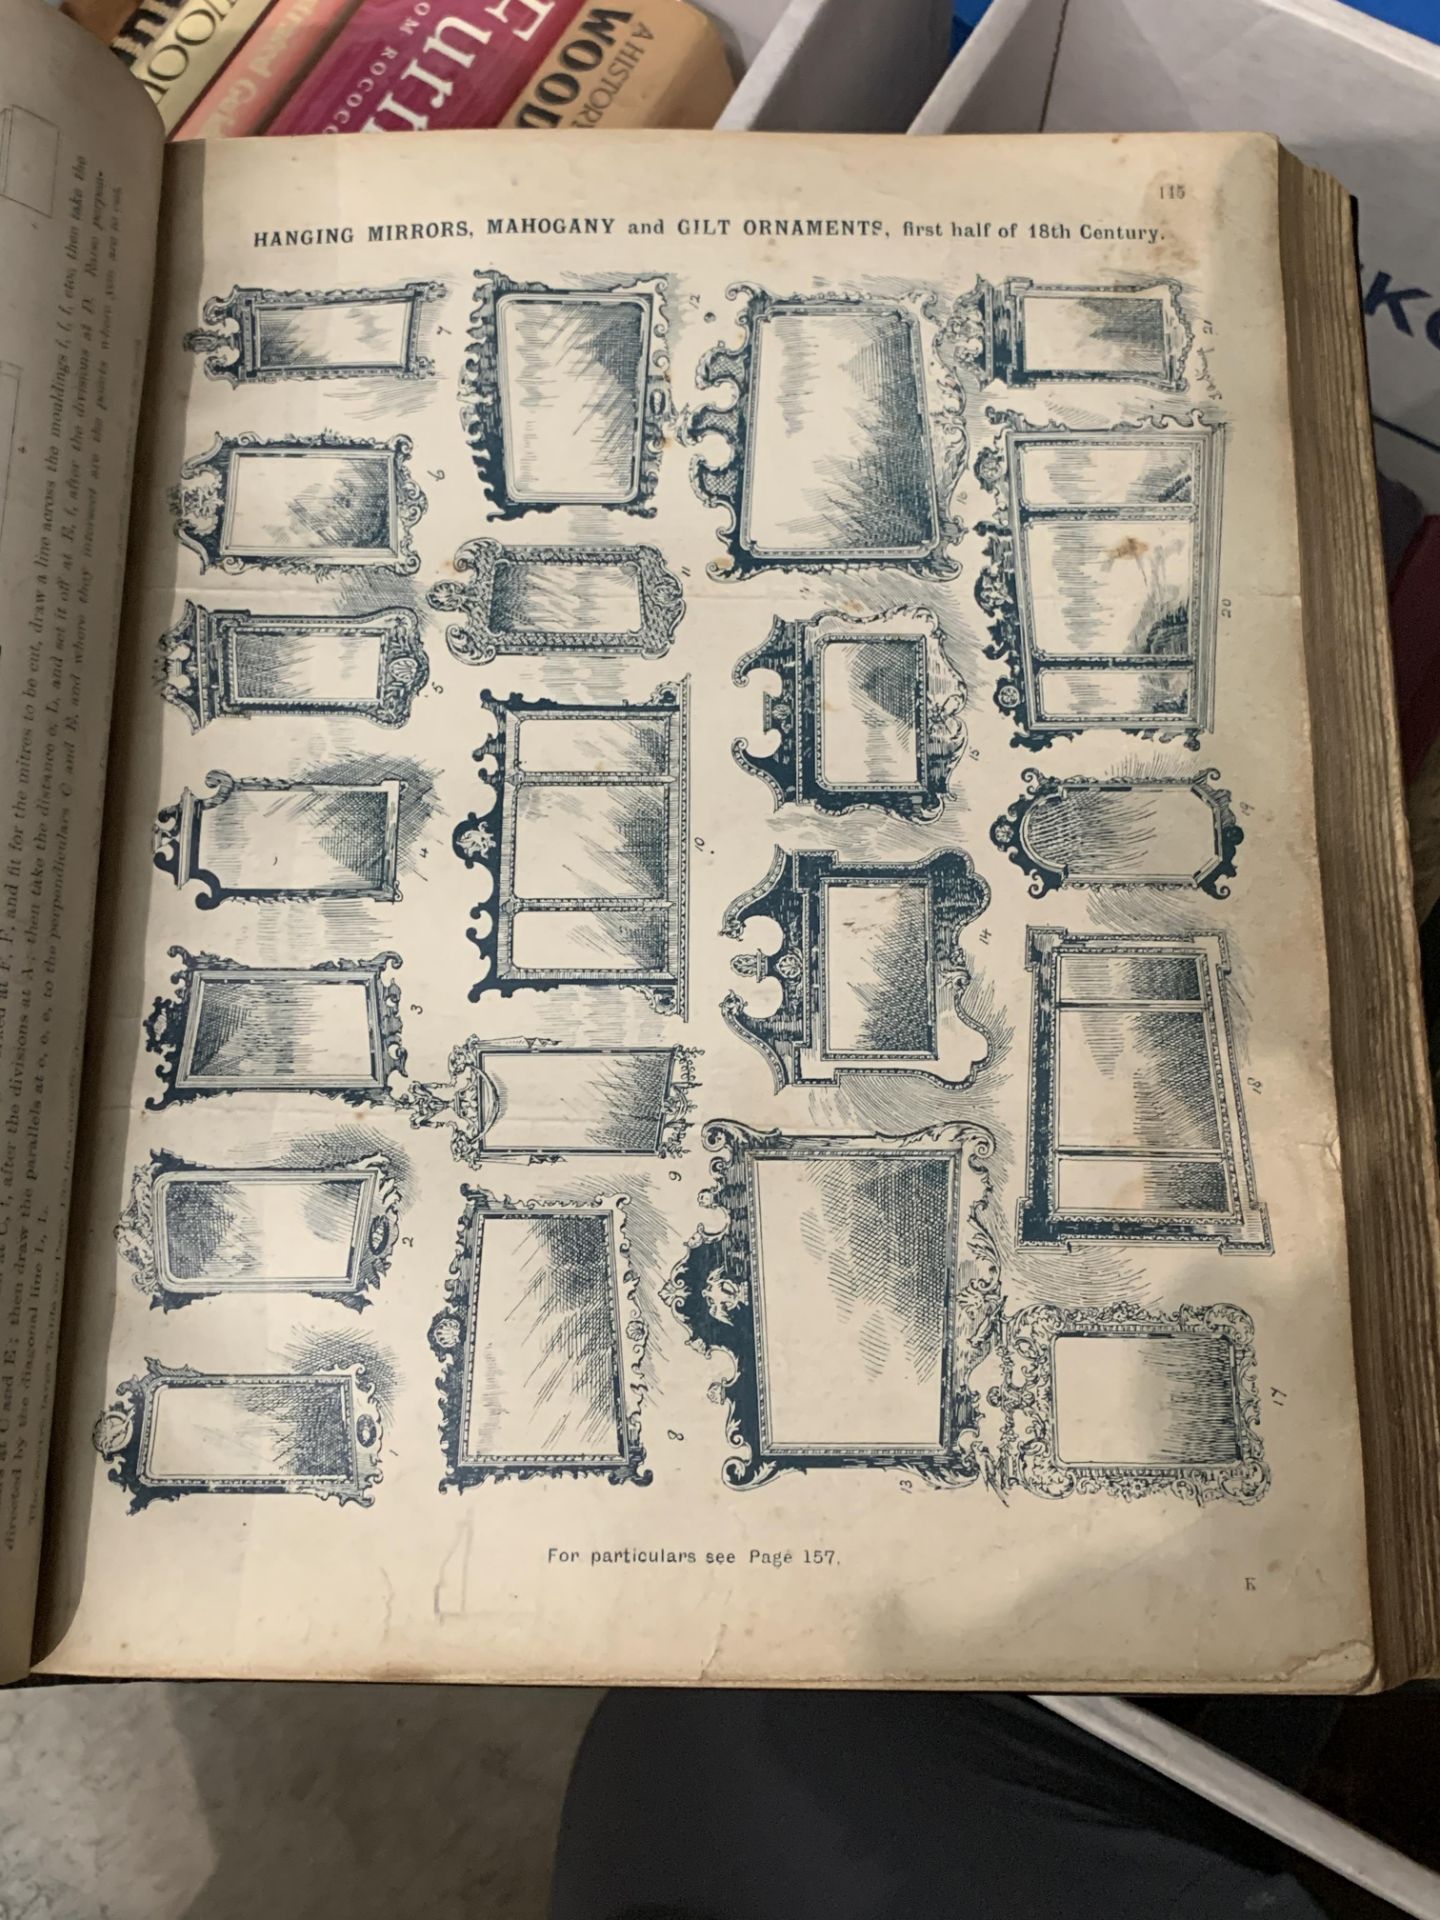 Contents to three boxes, various books on furniture, woodworking and metalwork, - Image 12 of 13